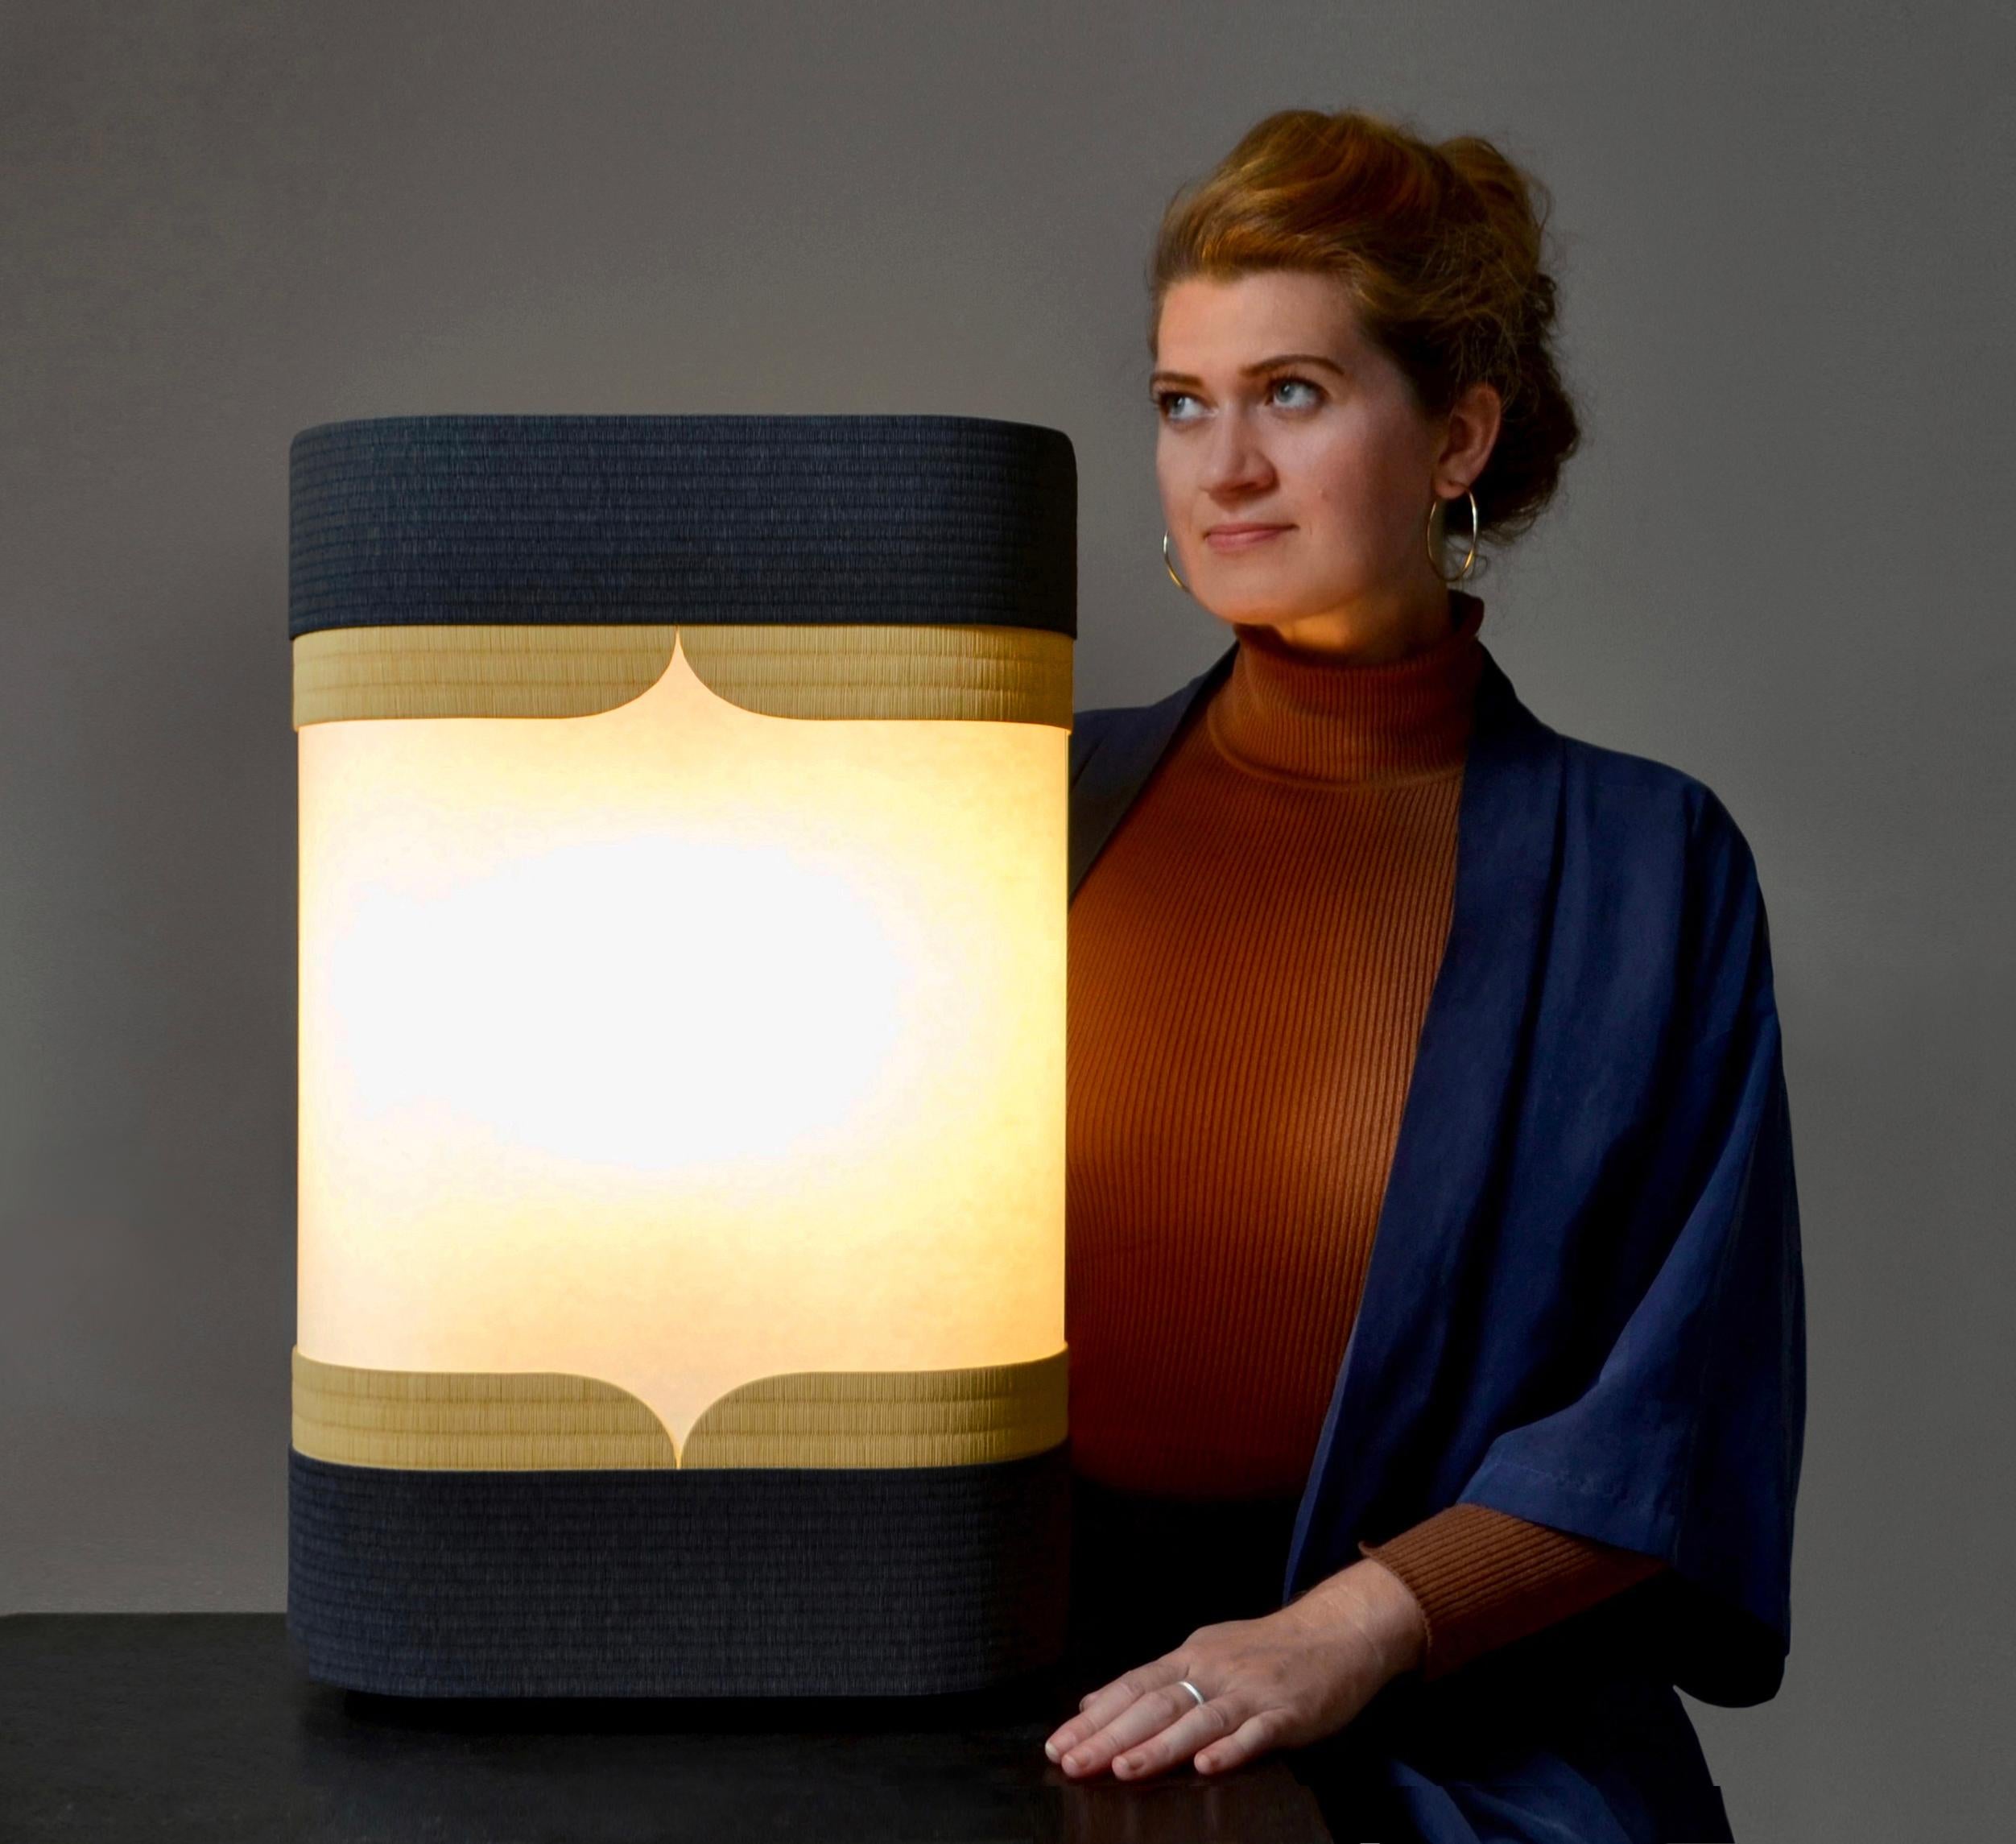 Kensho light by Astrid Hauton
Dimensions: W 37 x D 18 x H 59 cm
Materials: woven washi paper, waxed black Valchromat, polyphane, Japanese paper, removable cover in
opalescent plexiglass.

« Kensho », in Zen tradition, refers to the experience